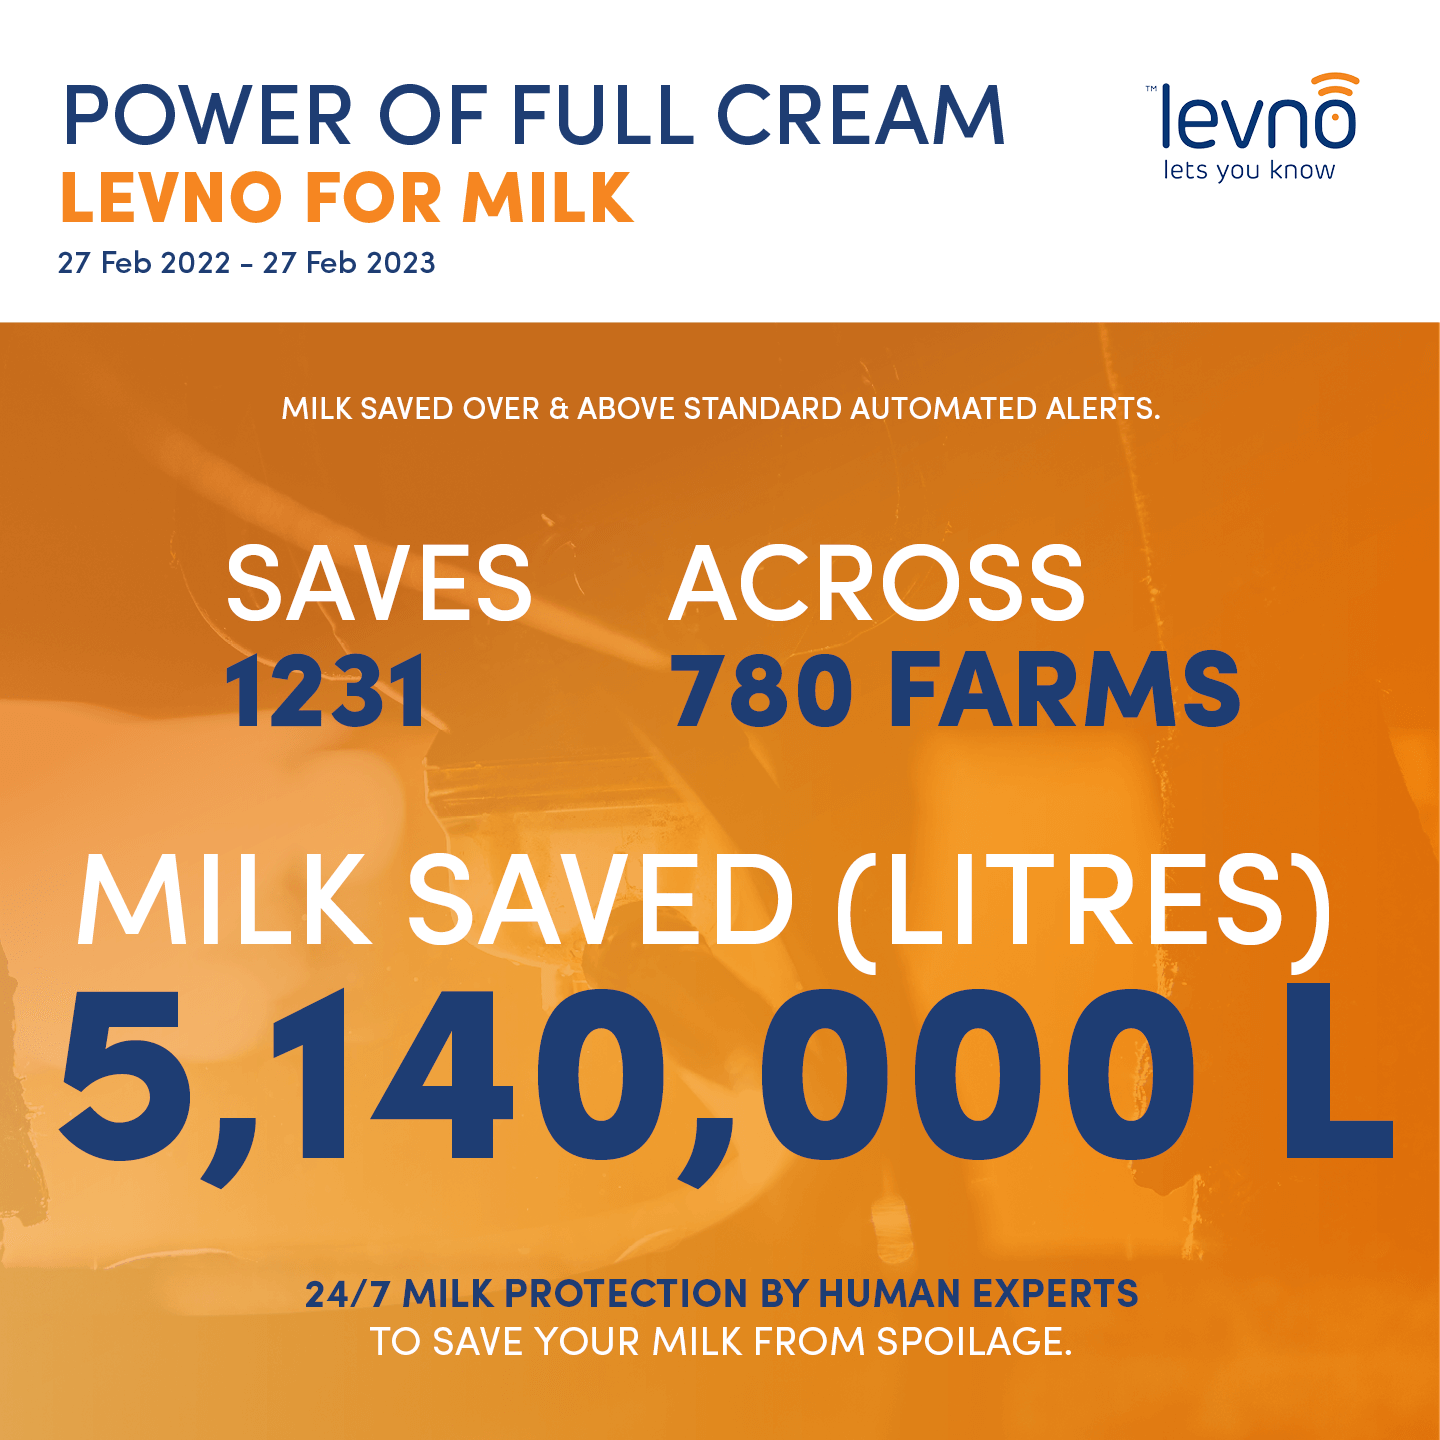 The following statistics are over and above standard automated alerts and only for Levno for Milk | Full Cream.